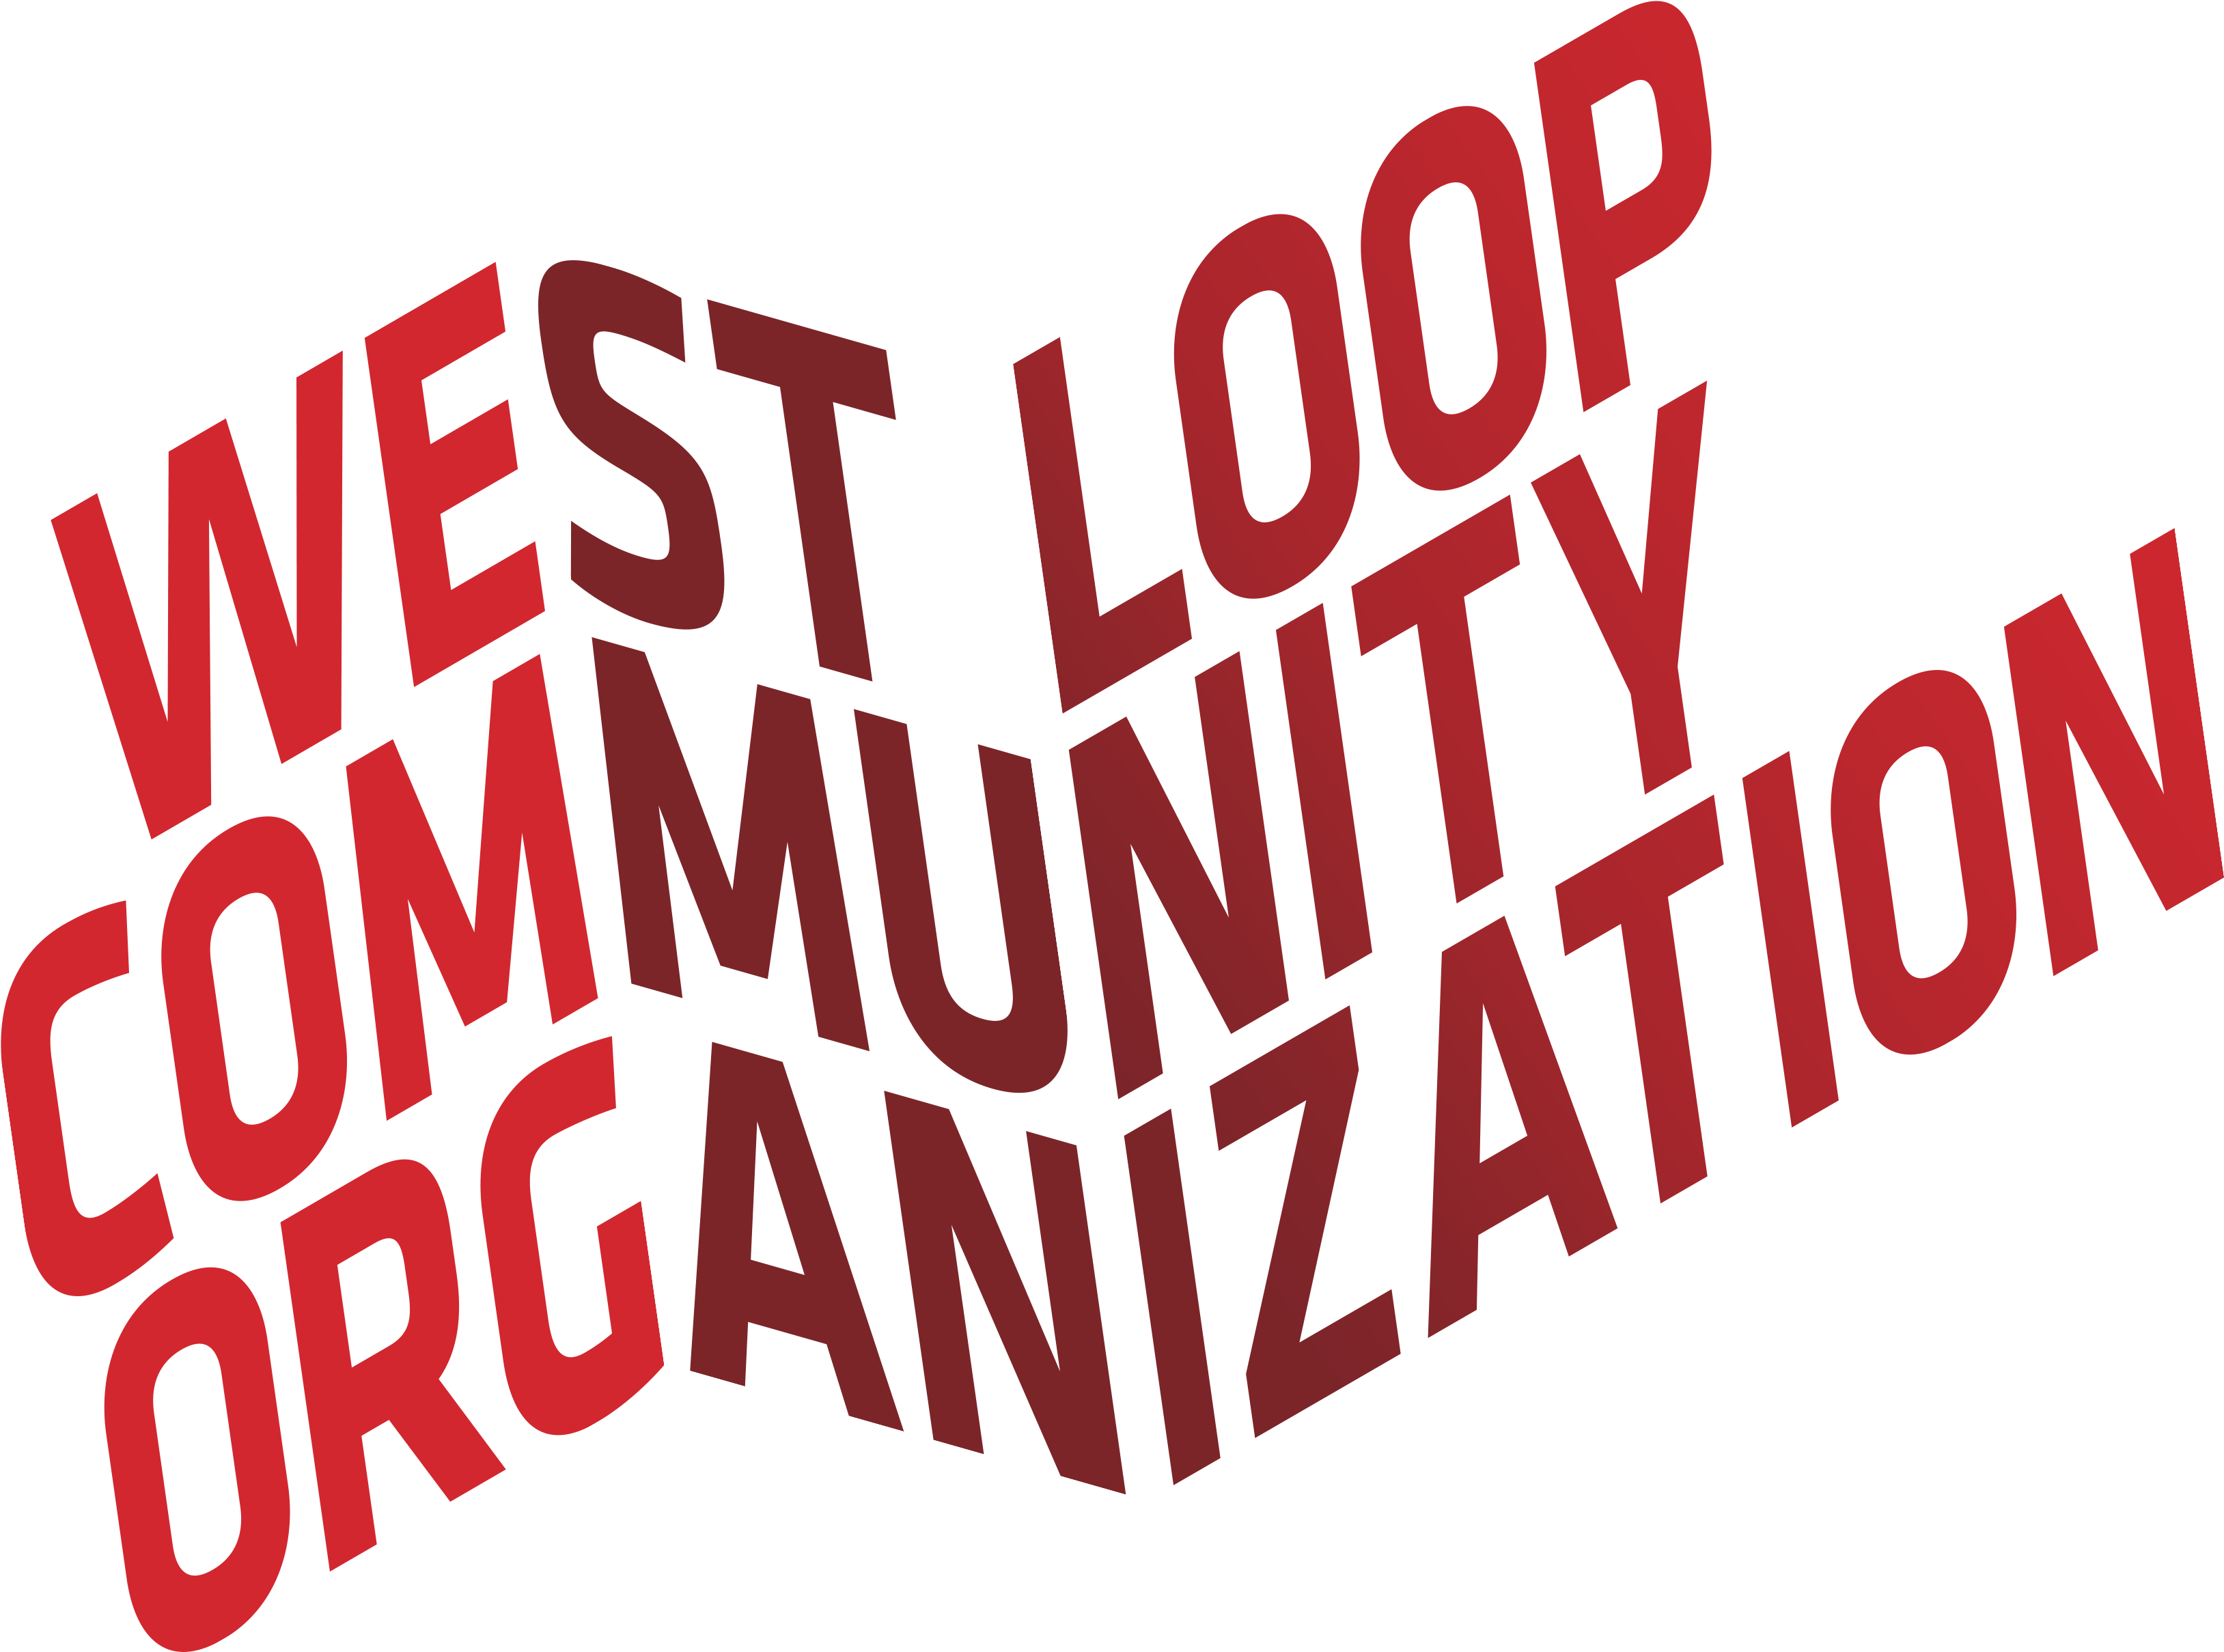 West Loop Community Organization's Request For Proposal - West Loop Community Organization (3331x2495)